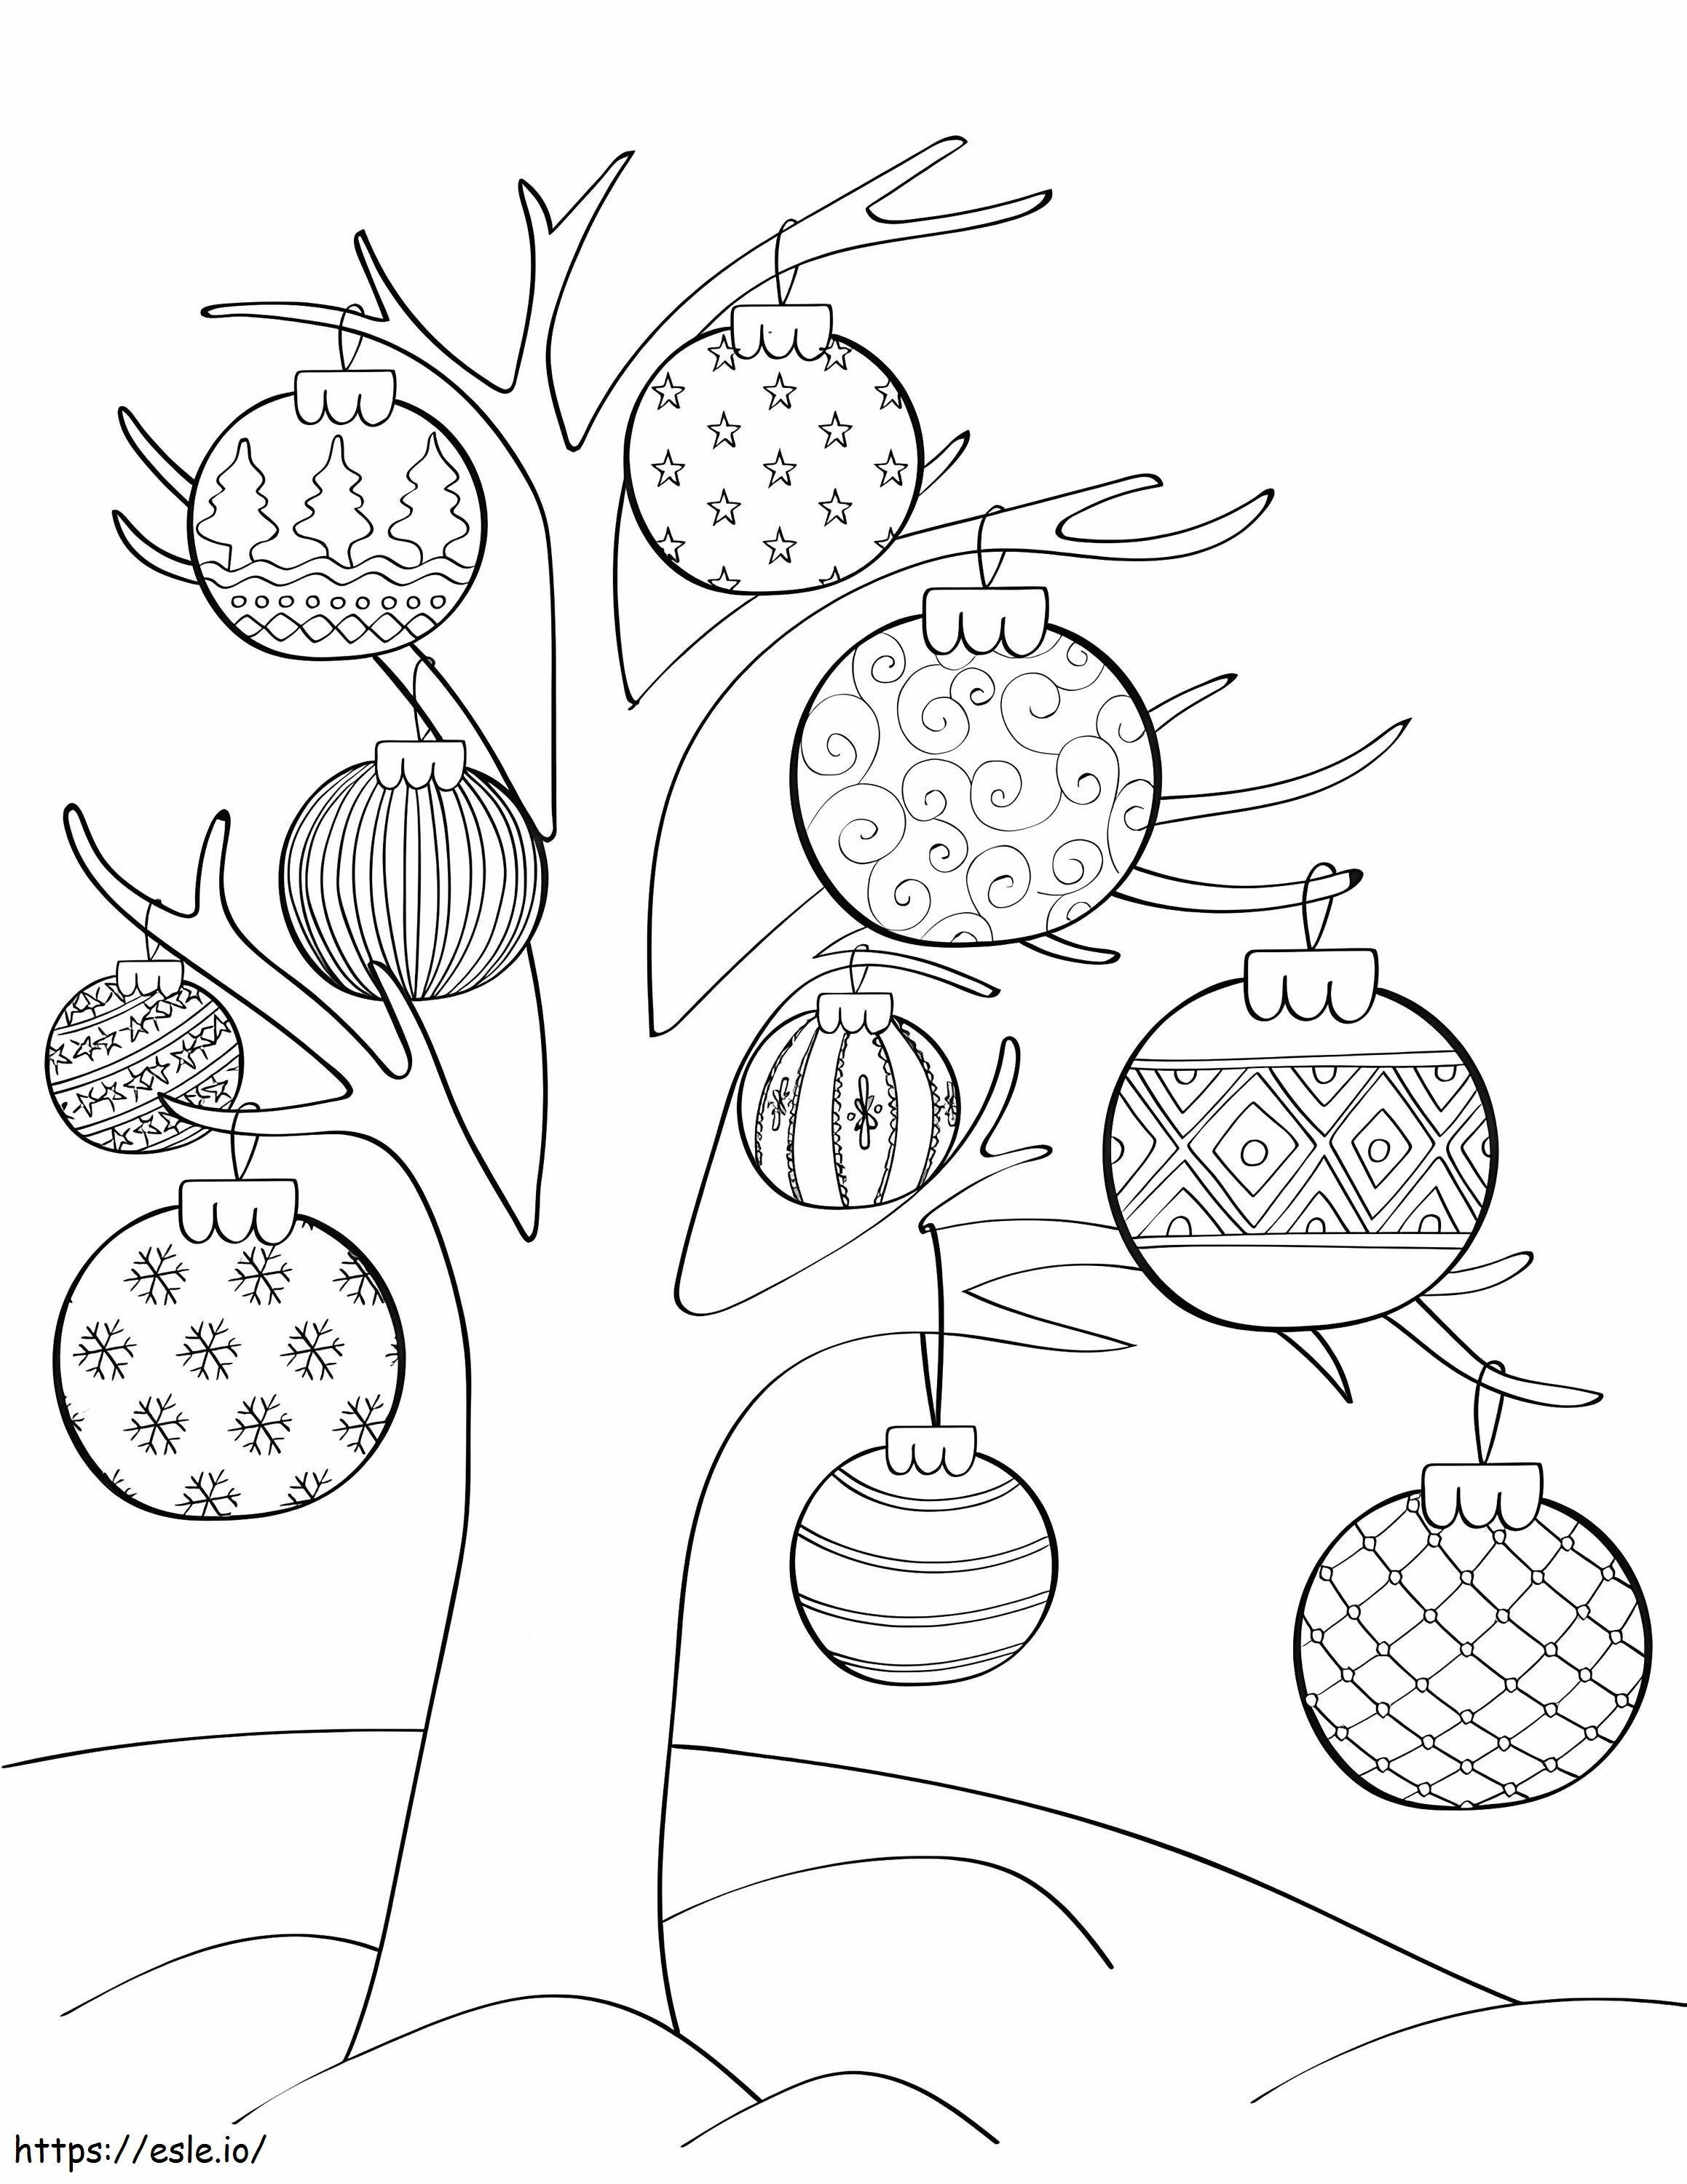 Christmas Bauble 1 coloring page